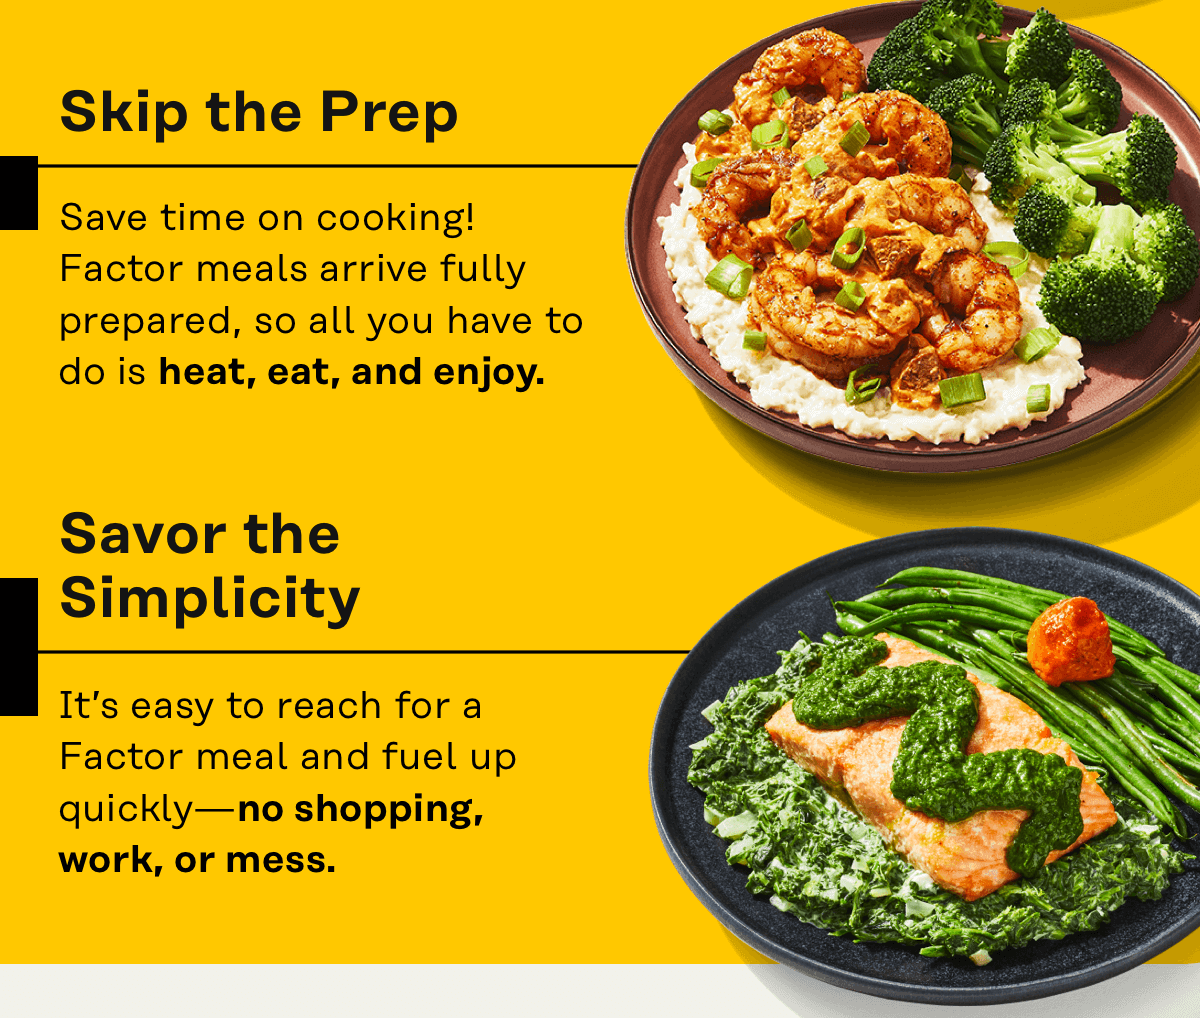 No more meal planning - skip the prep and savor the simplicity of Factor